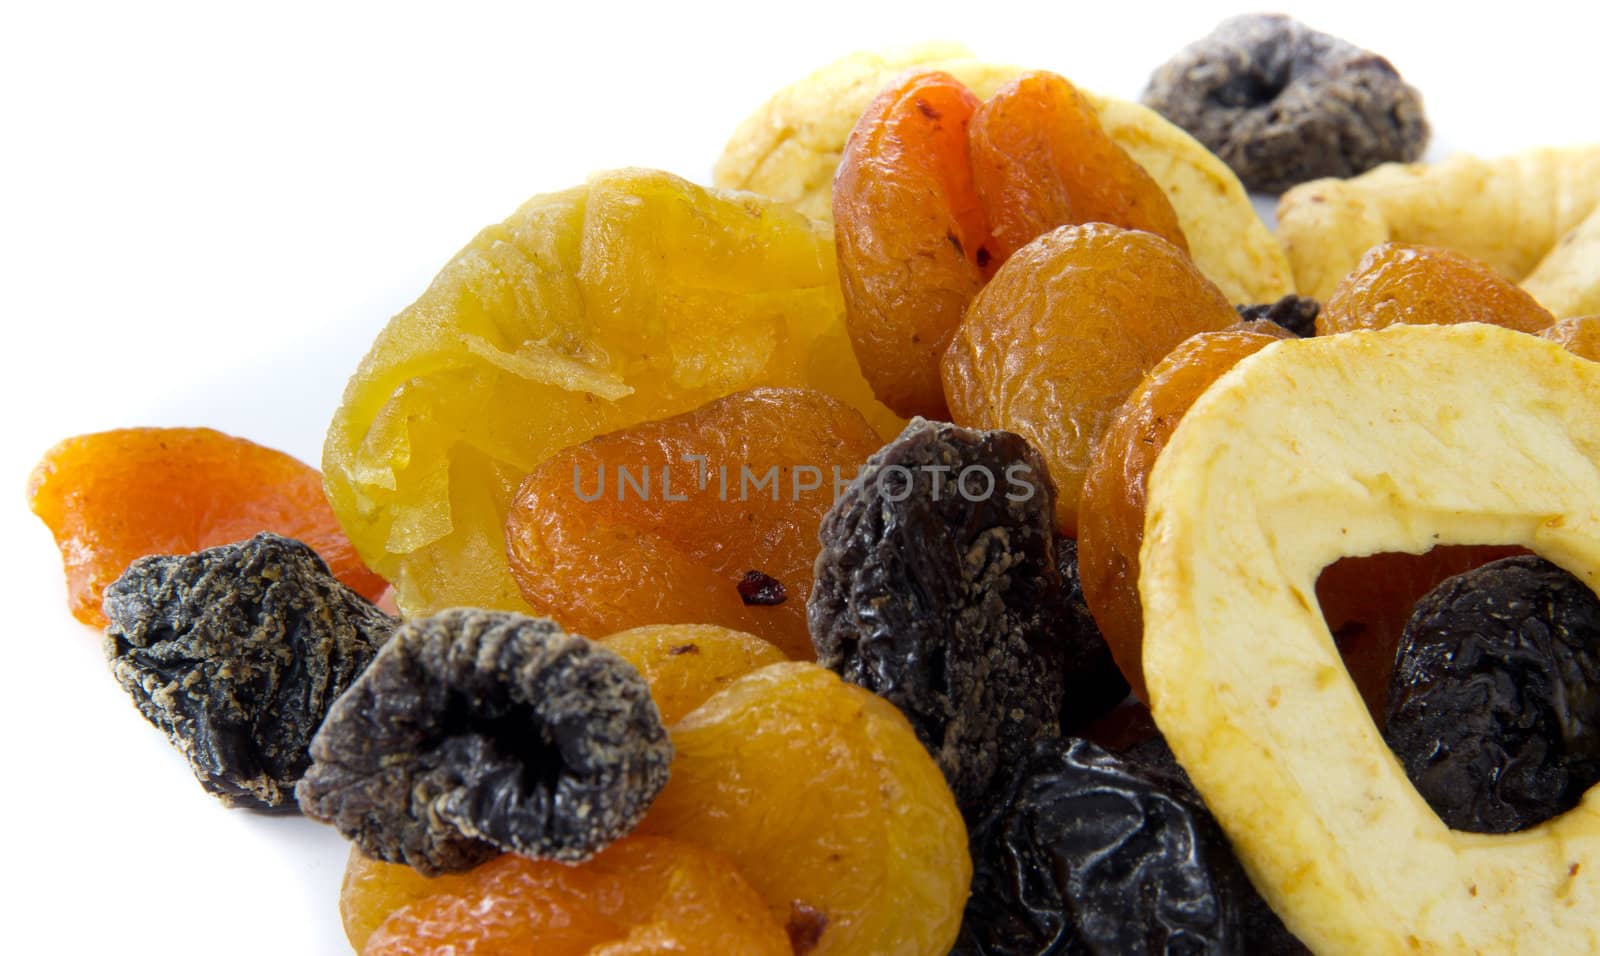 Dried fruits 2 by Stootsy